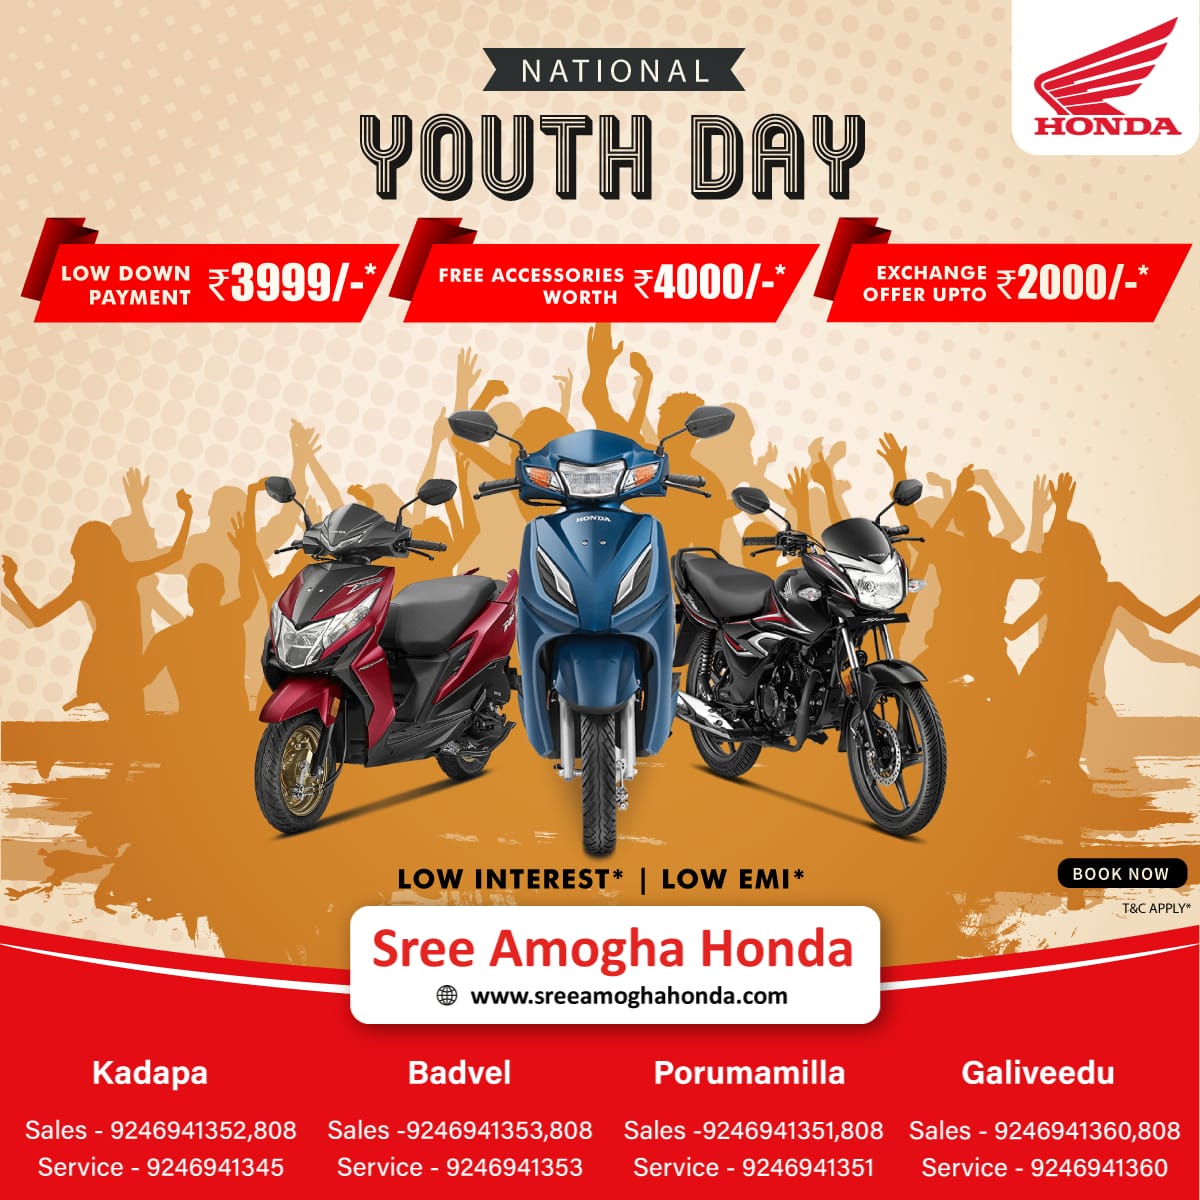 To the heroes of tomorrow, to the energies that will define the future. Wishing you a very warm and Happy National Youth Day.
Presenting #HondaScooters or #HondaBike with a
✅Low Down of just ₹3999/-*
✅Free Accessories worth ₹4000/-*
✅Exchange offer upto ₹2000/-*